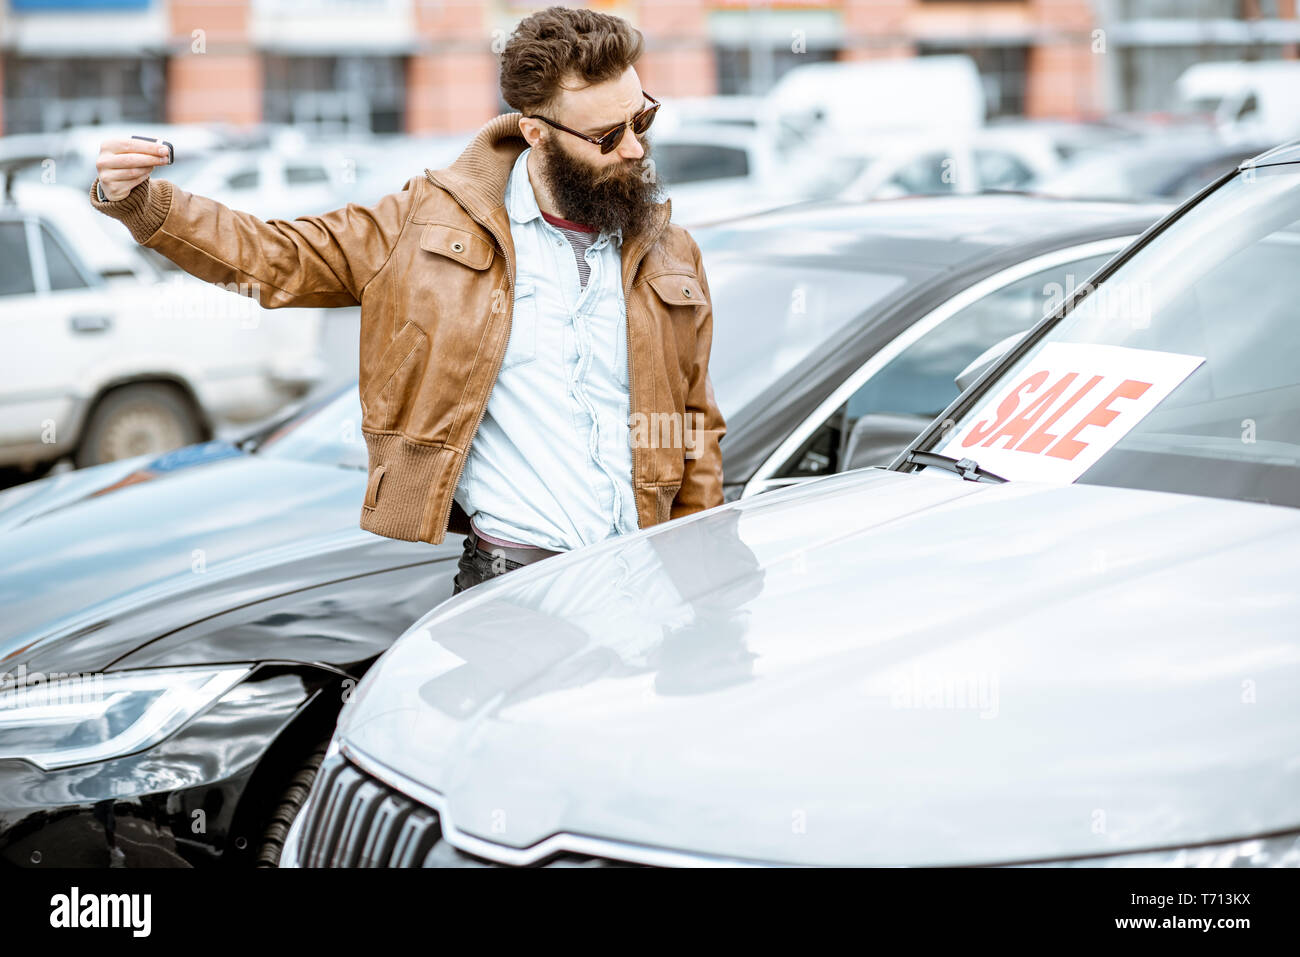 Man choosing luxury car to buy on the open ground of the dealership Stock Photo